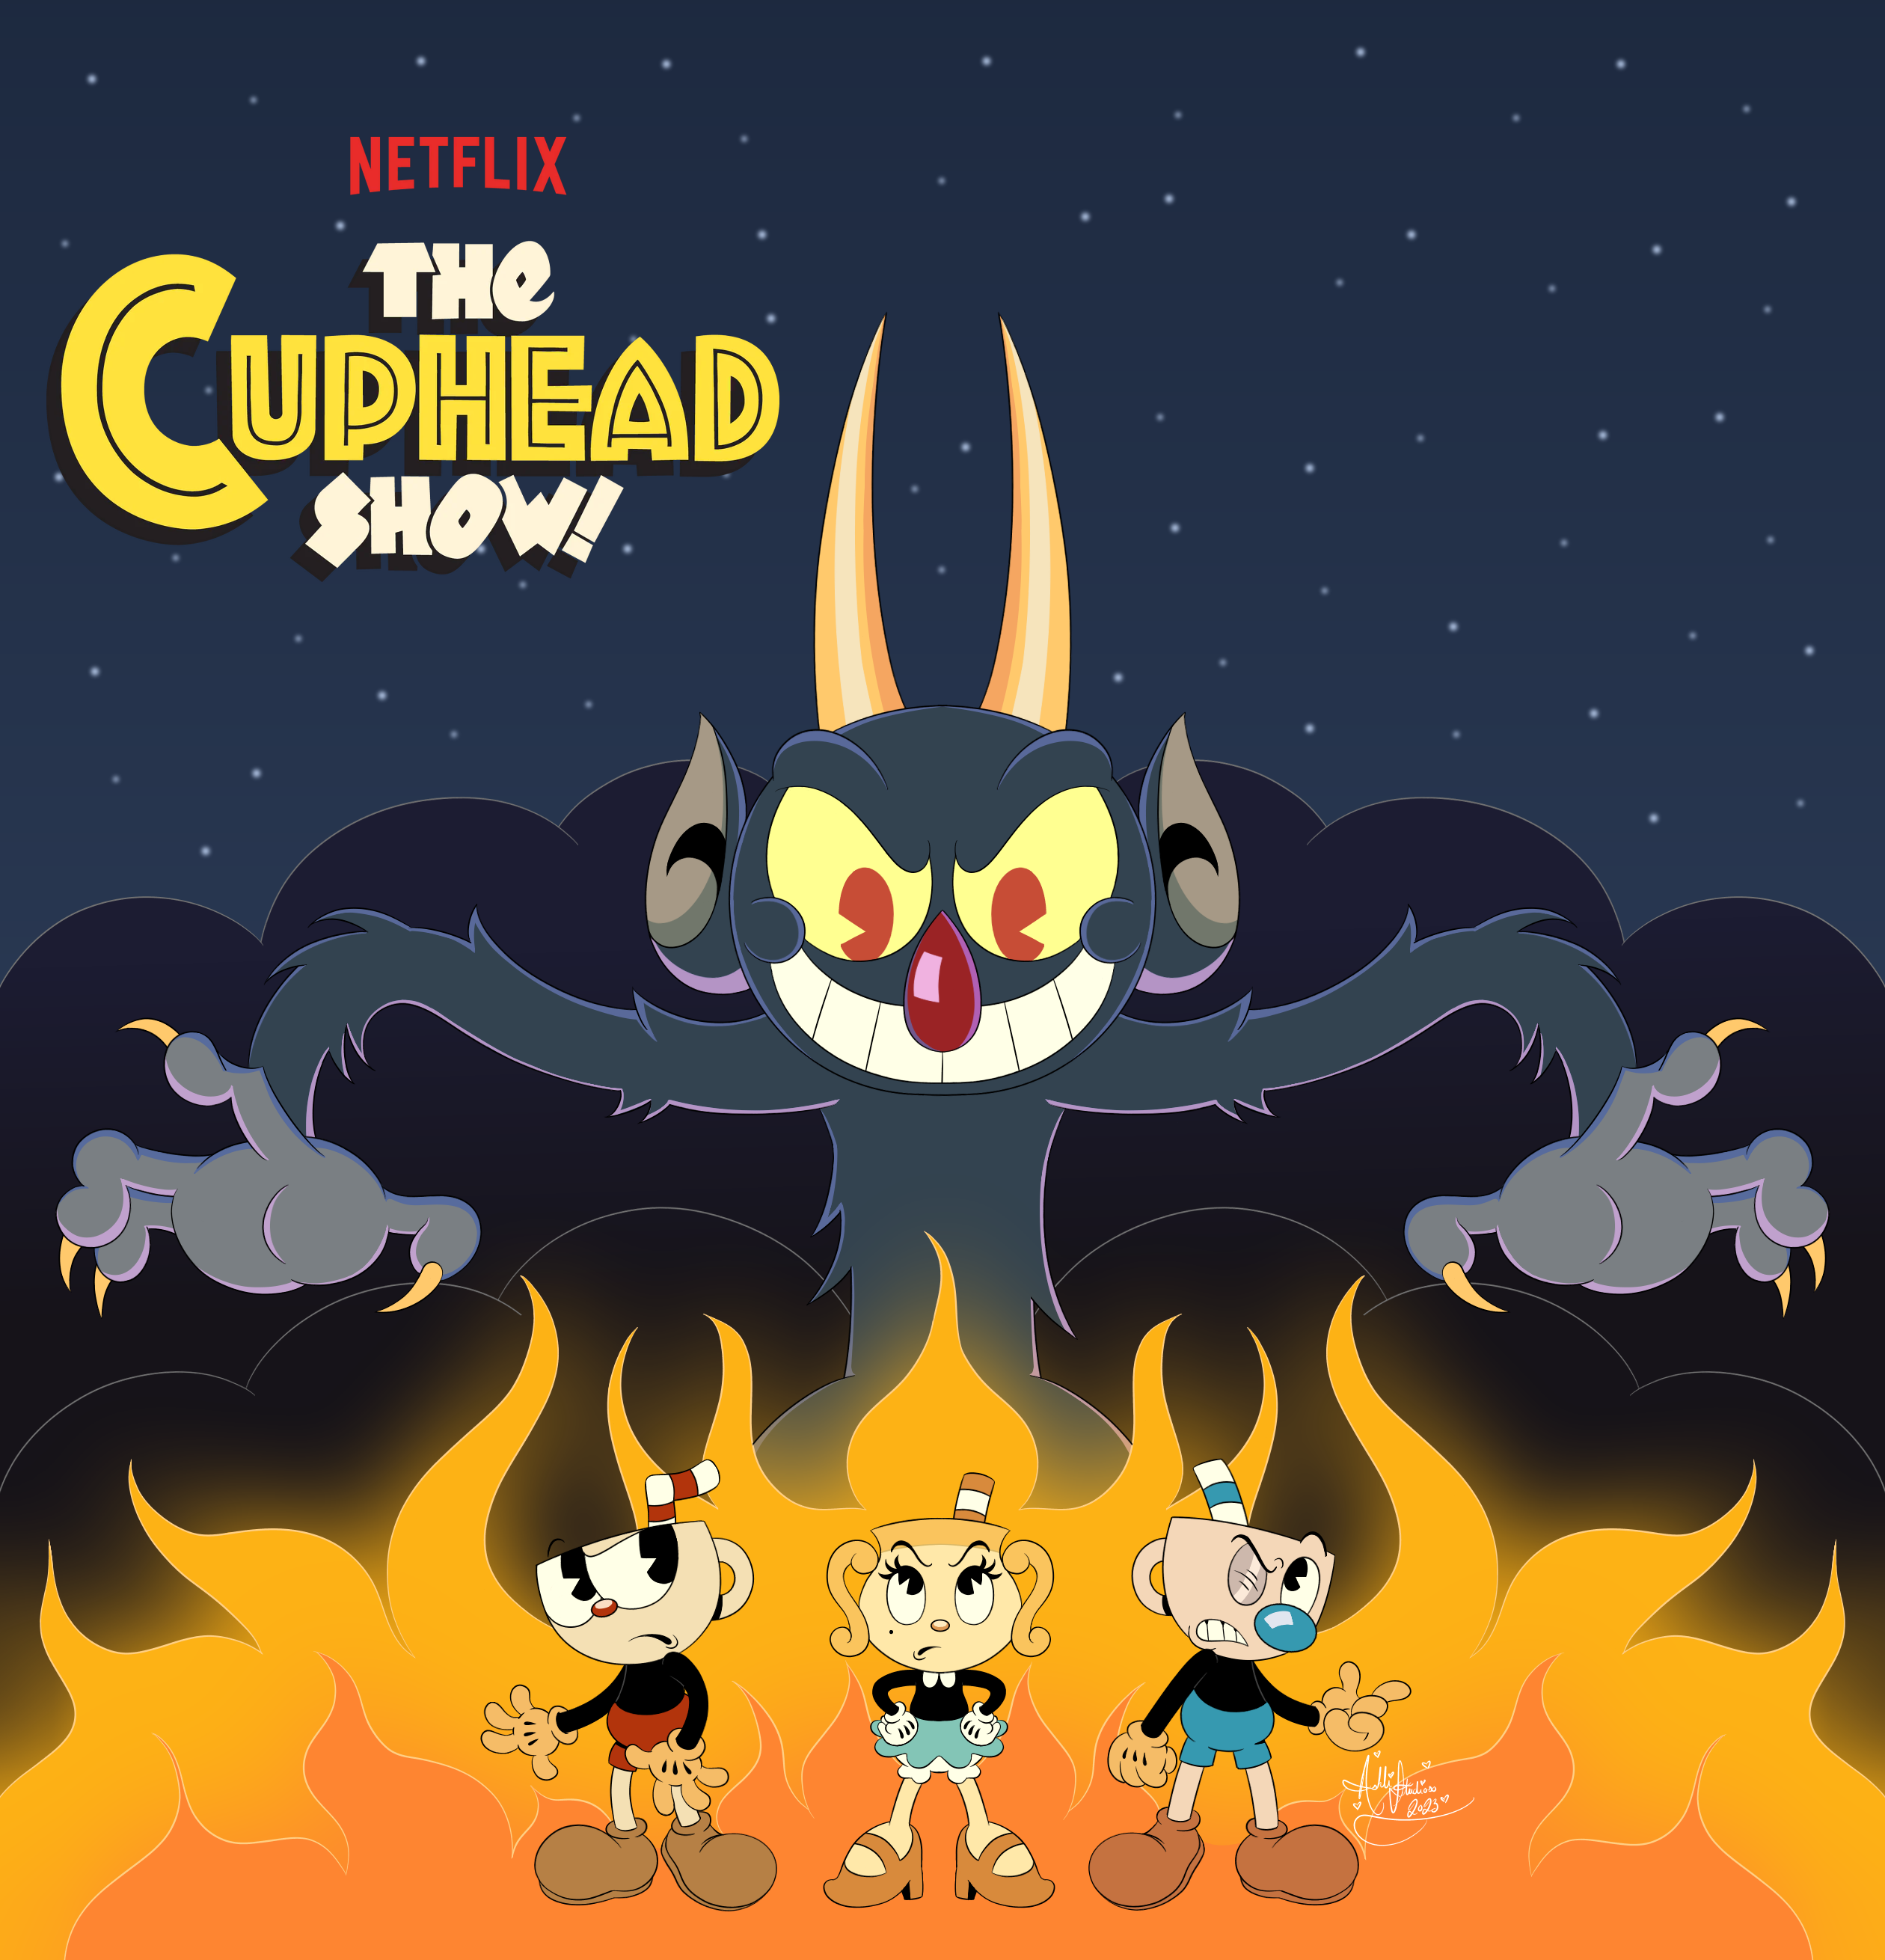 Welcome to the Cuphead Show! : . by GamingGoru on DeviantArt